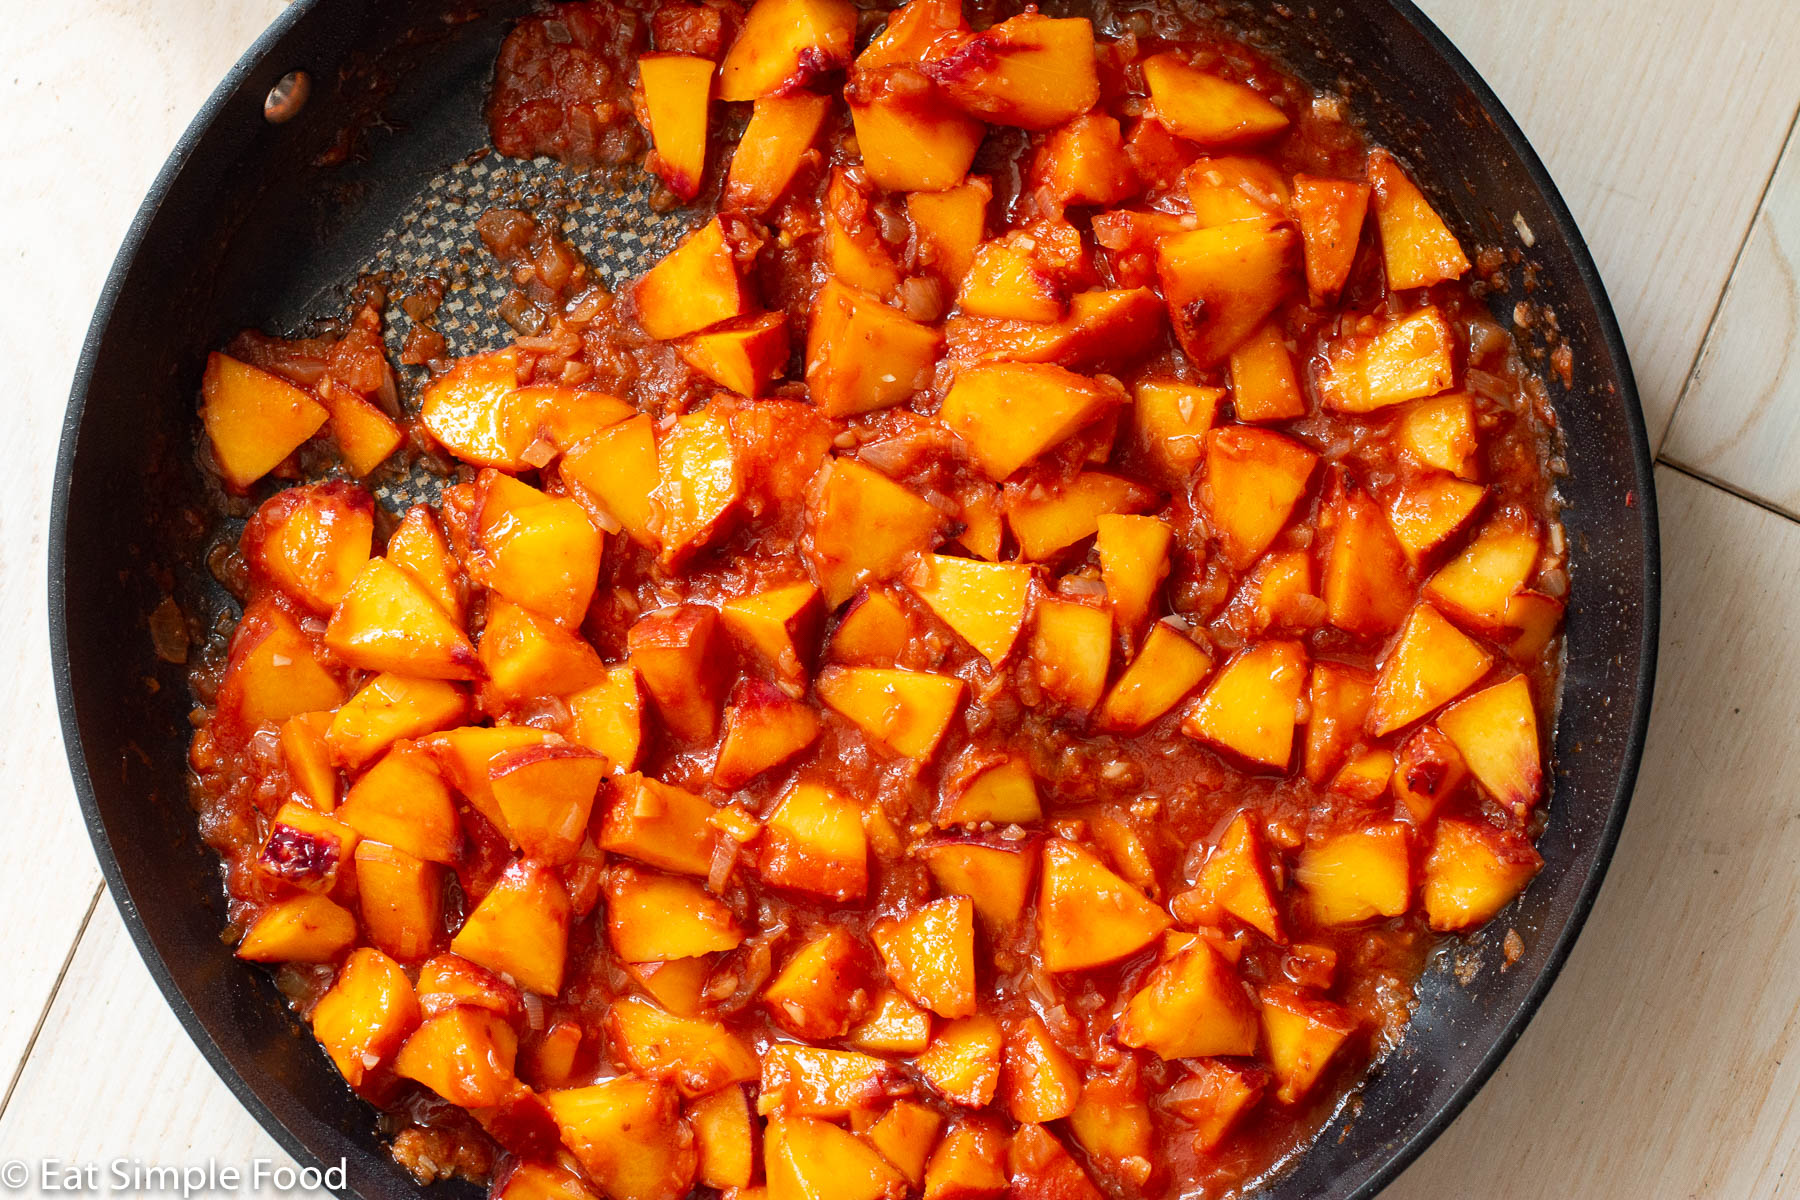 Top down view of a black skillet with diced peaches in a tomato based sauce.